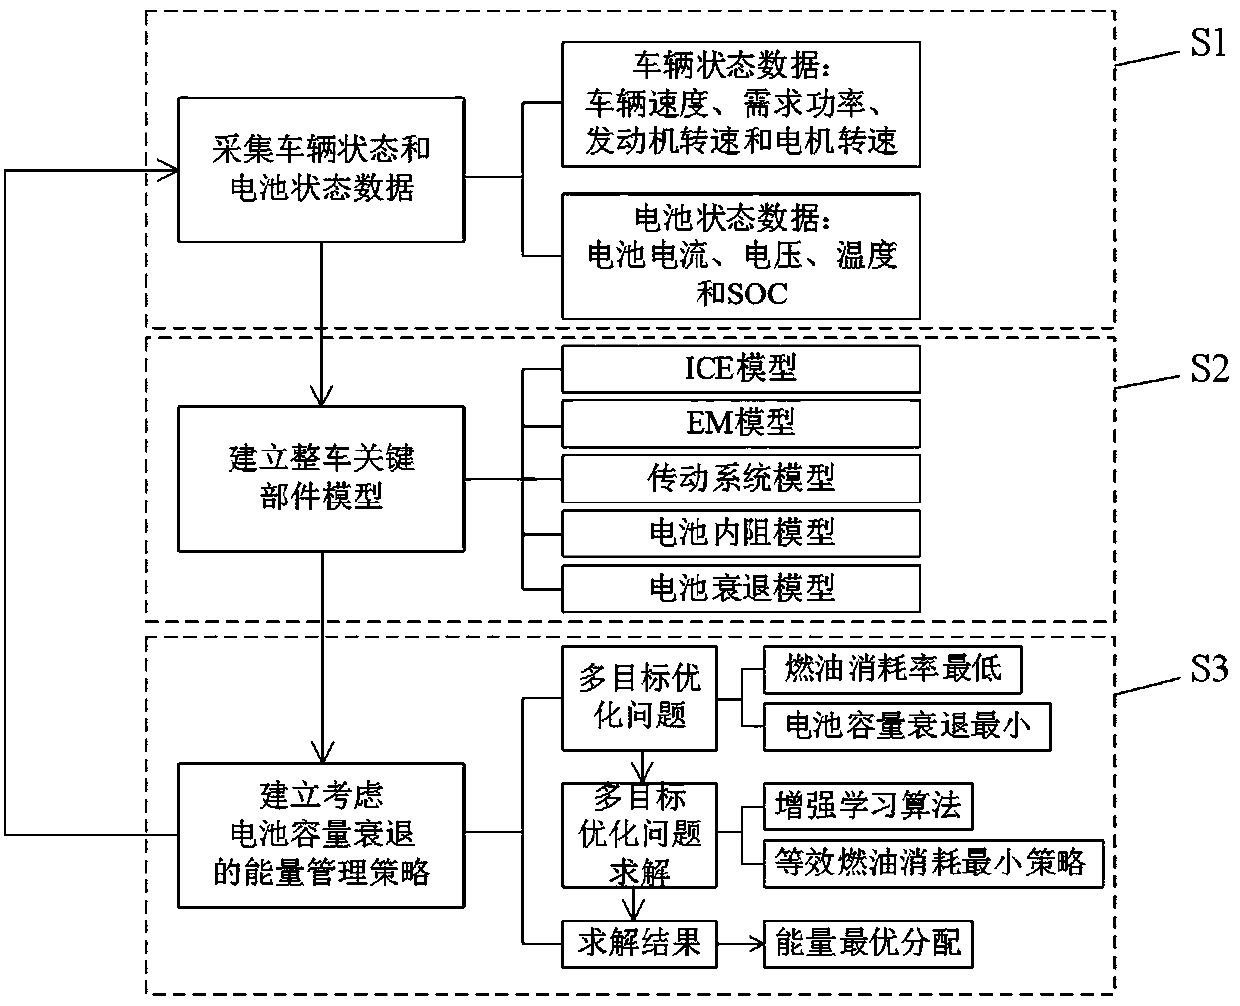 Hybrid electric vehicle reinforcement learning energy management control method